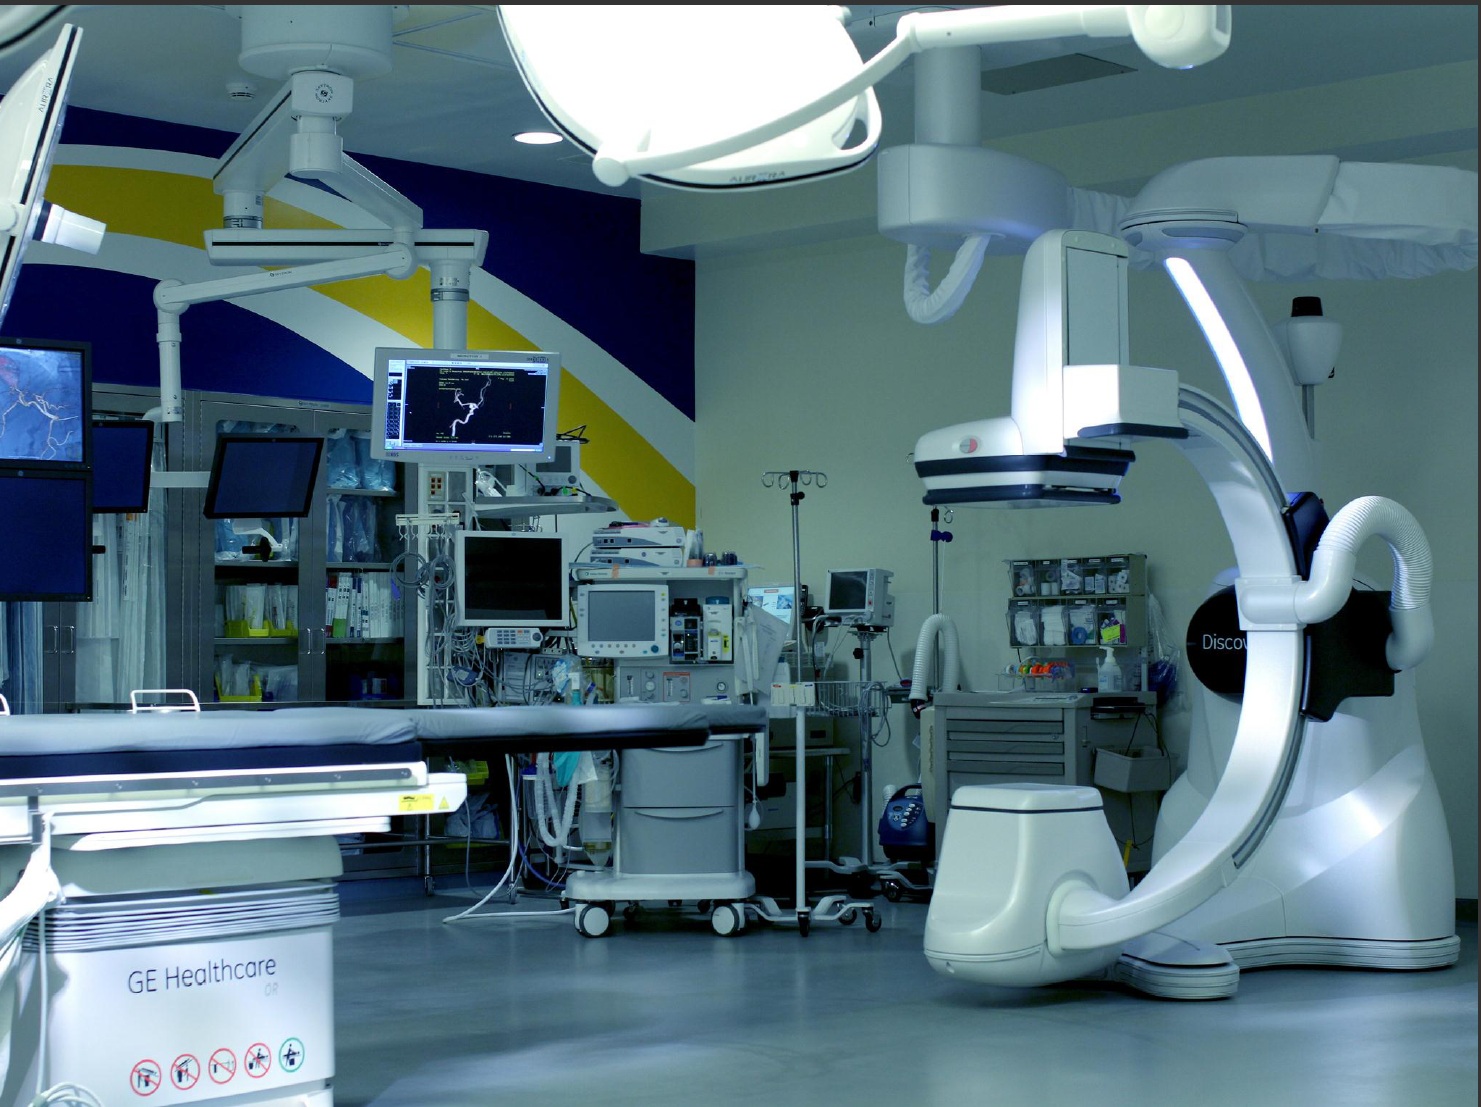 Hybrid-OR-Operating-Room-GE-Discovery-IGS-730-Skytron-LED-Surgical-Lights-Equipment-Booms-PA-24.jpg